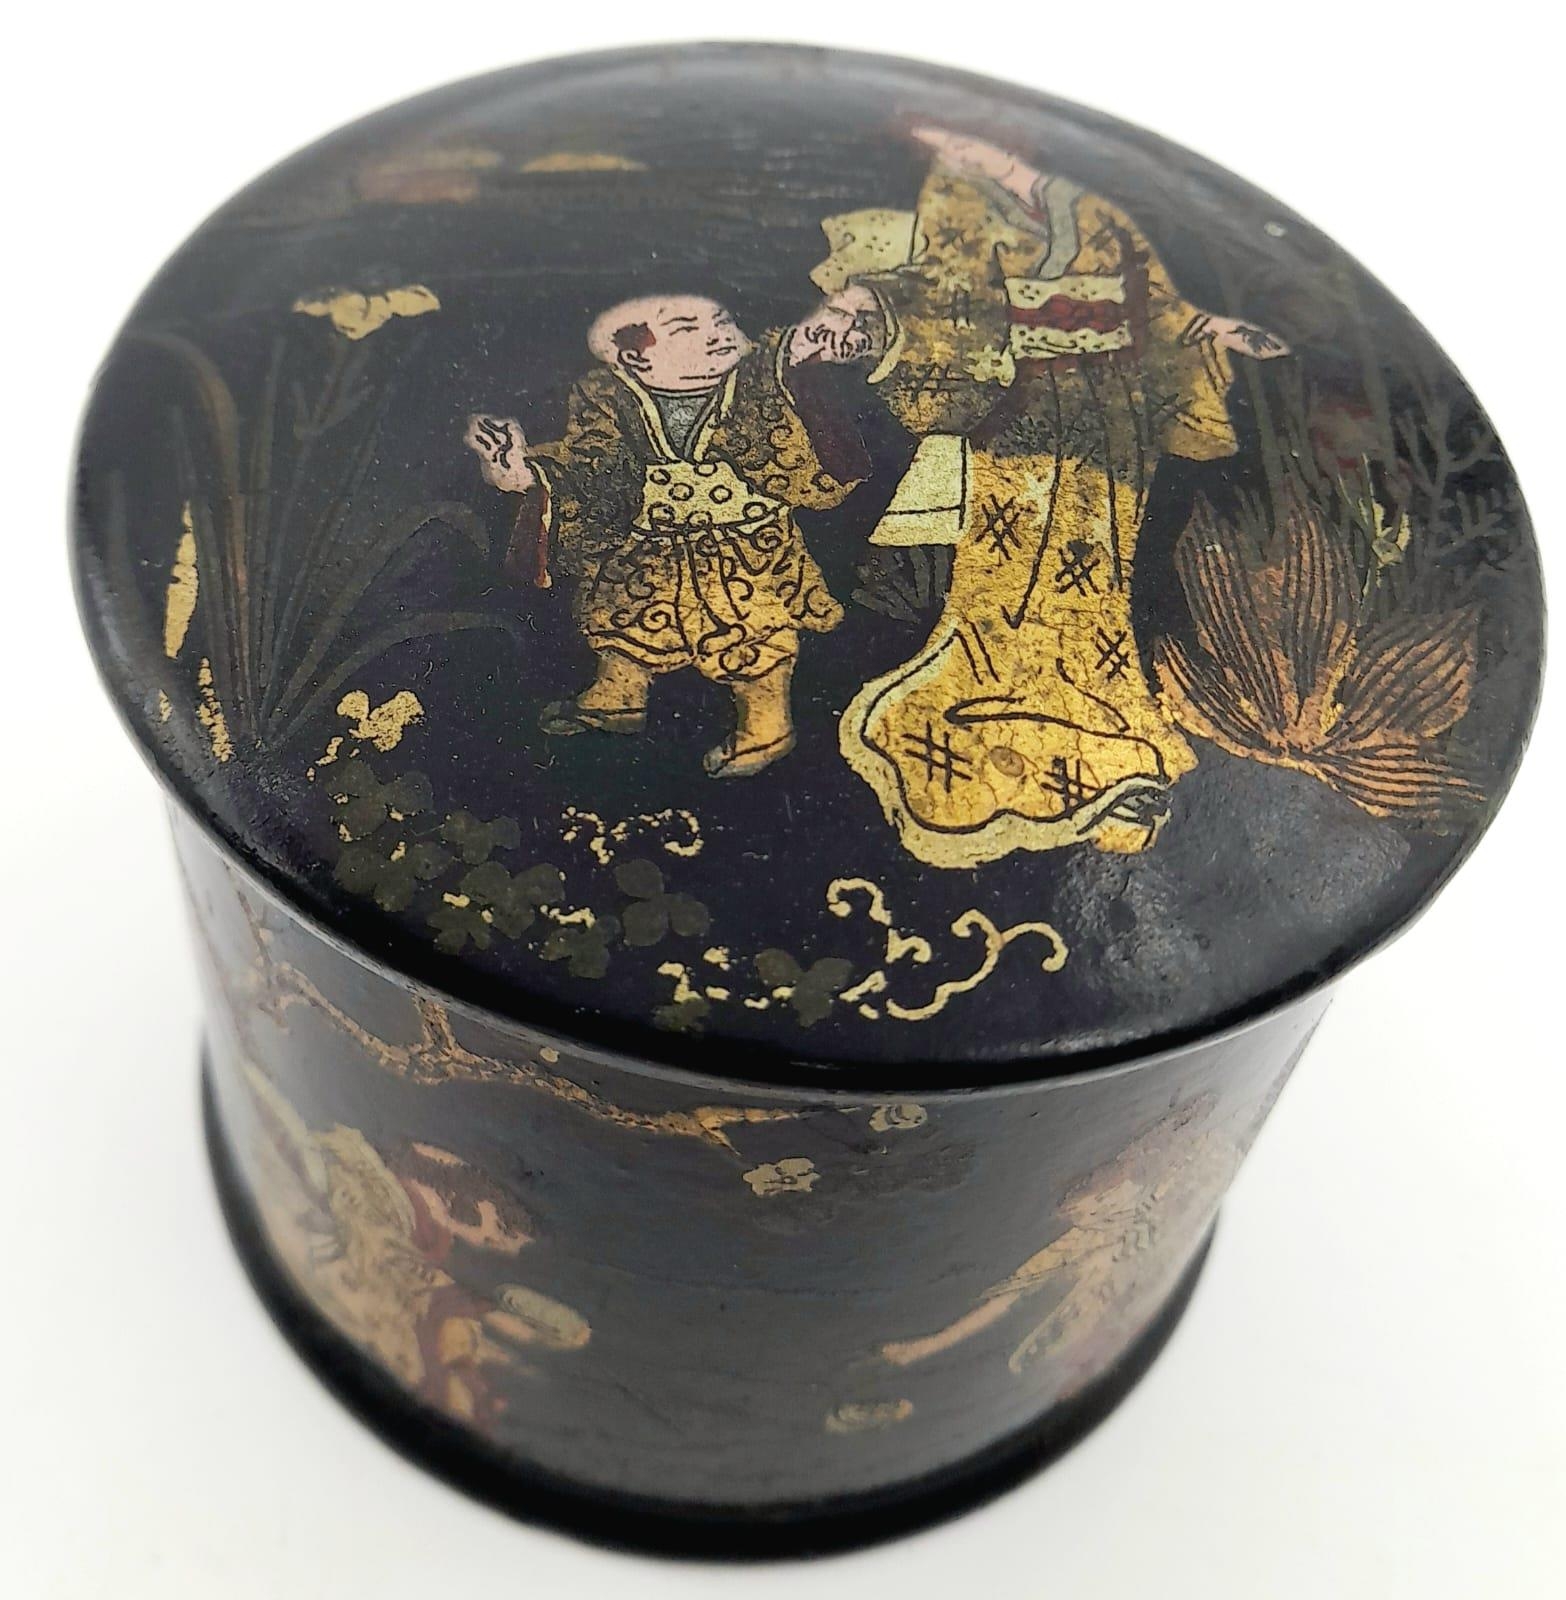 An Antique Chinese Black Lacquer Box. Wonderful decoration with gold on black depicting Mothers at